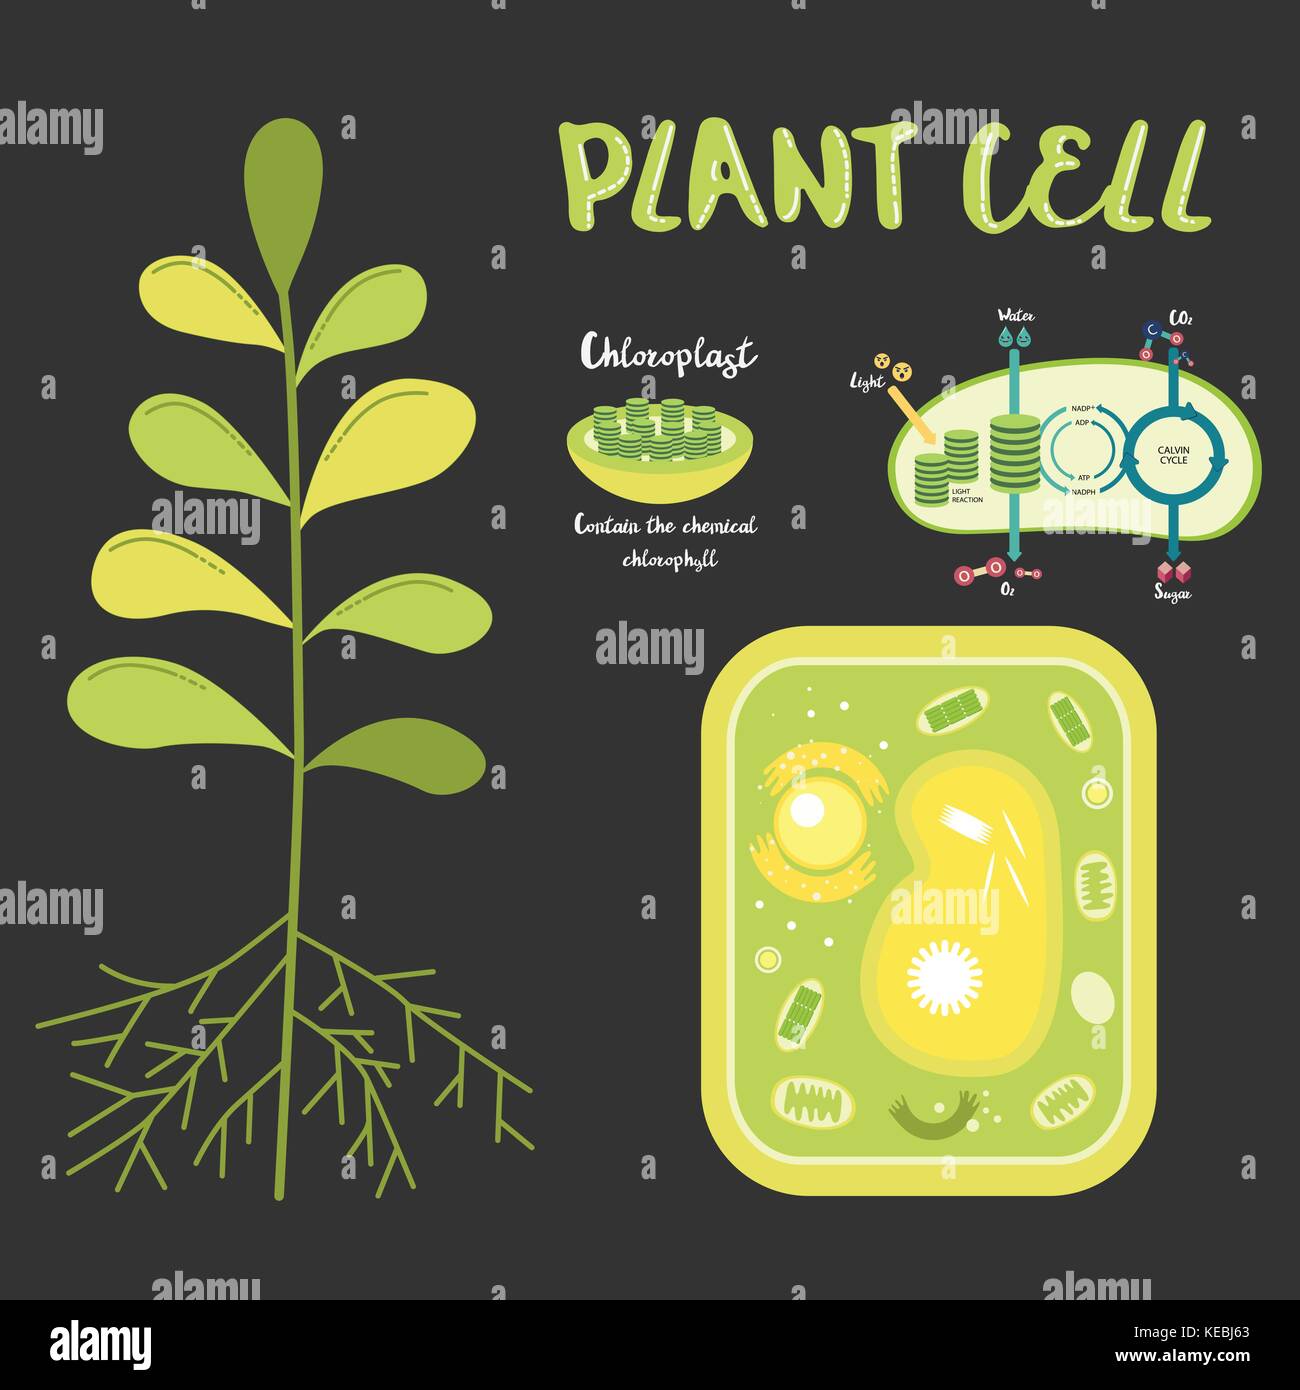 Inside theplant cell structure illustration vector Stock Vector